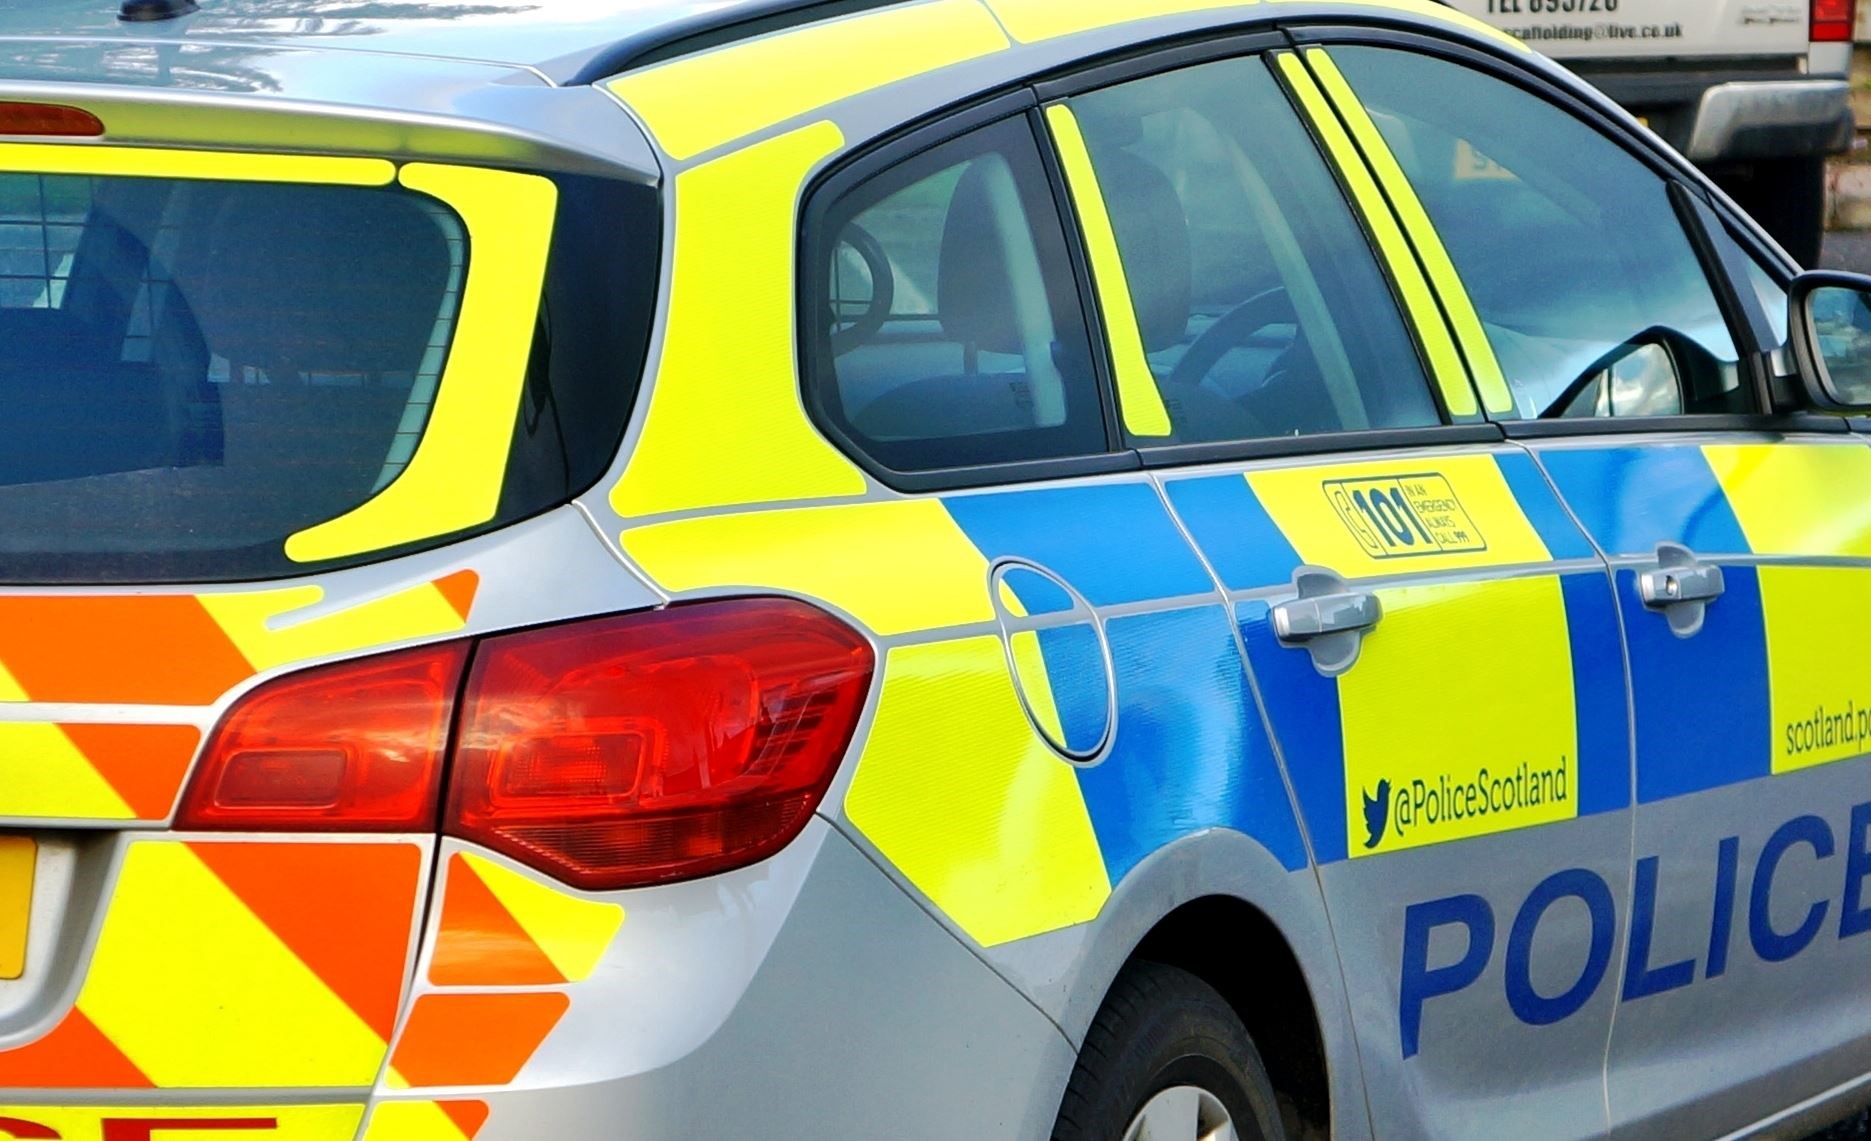 Police are appealing for information after a serious crash on the A9 at Invergordon on Tuesday.